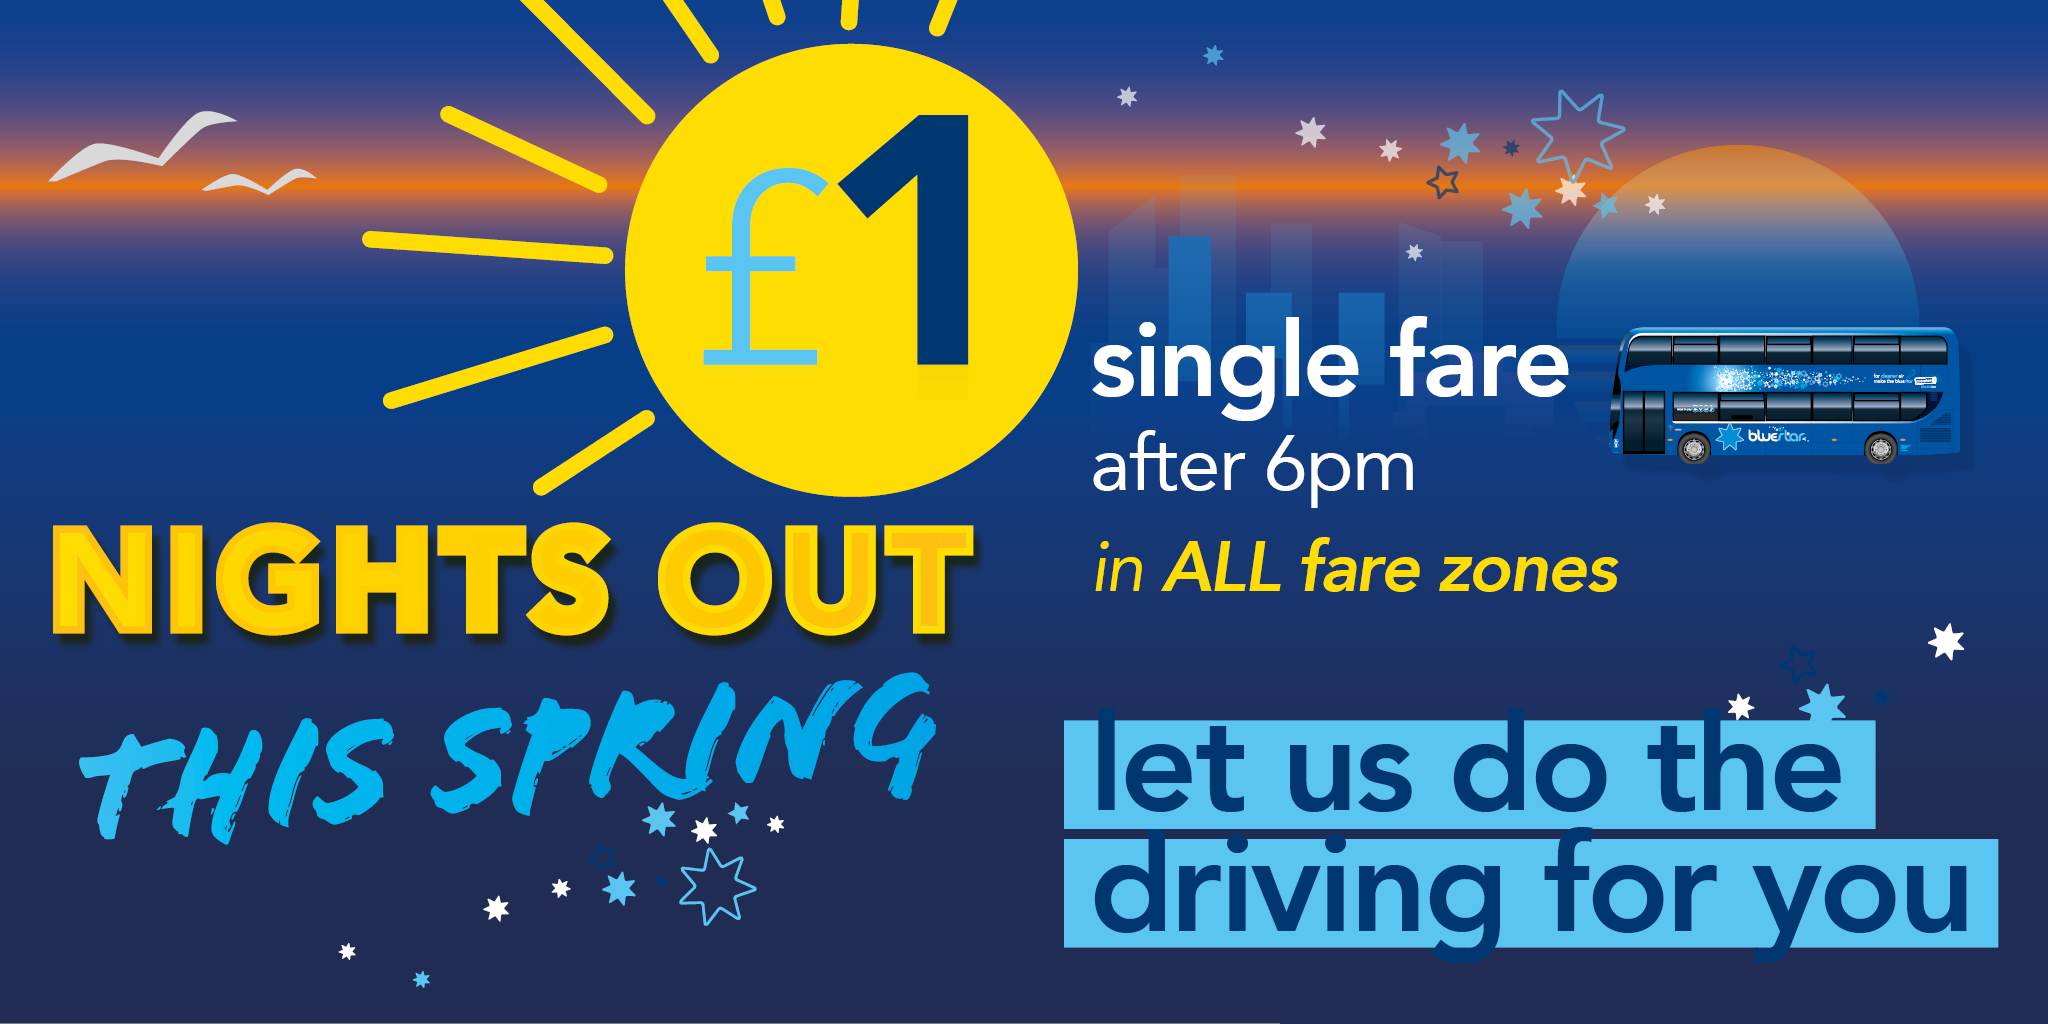 nights out this spring £1 single fare after 6pm in all fare zones